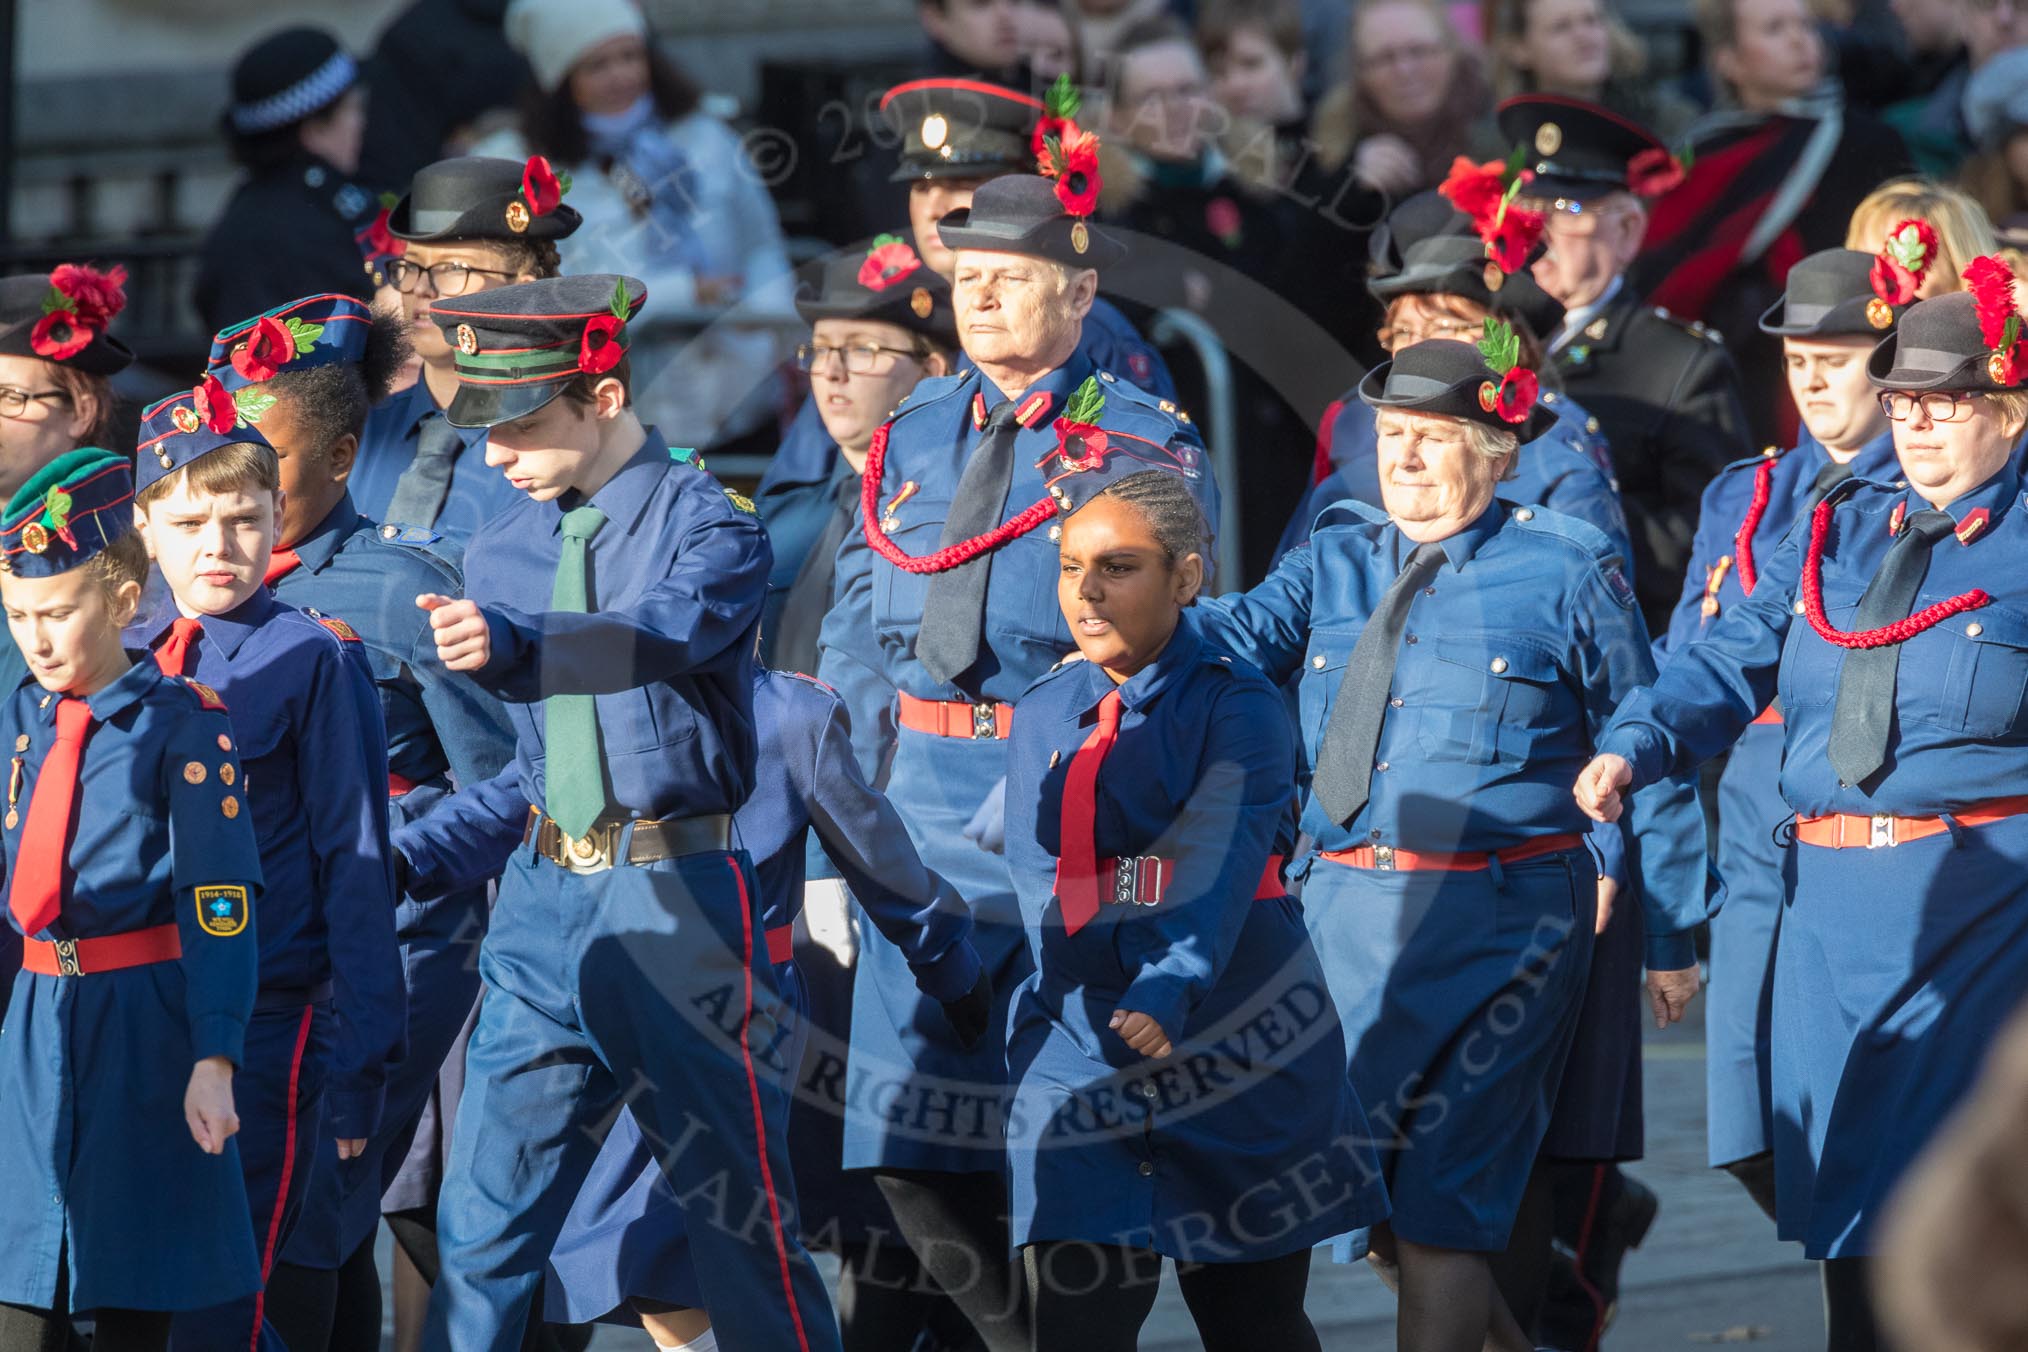 March Past, Remembrance Sunday at the Cenotaph 2016: M36 Church Lads & Church Girls Brigade.
Cenotaph, Whitehall, London SW1,
London,
Greater London,
United Kingdom,
on 13 November 2016 at 13:19, image #2889